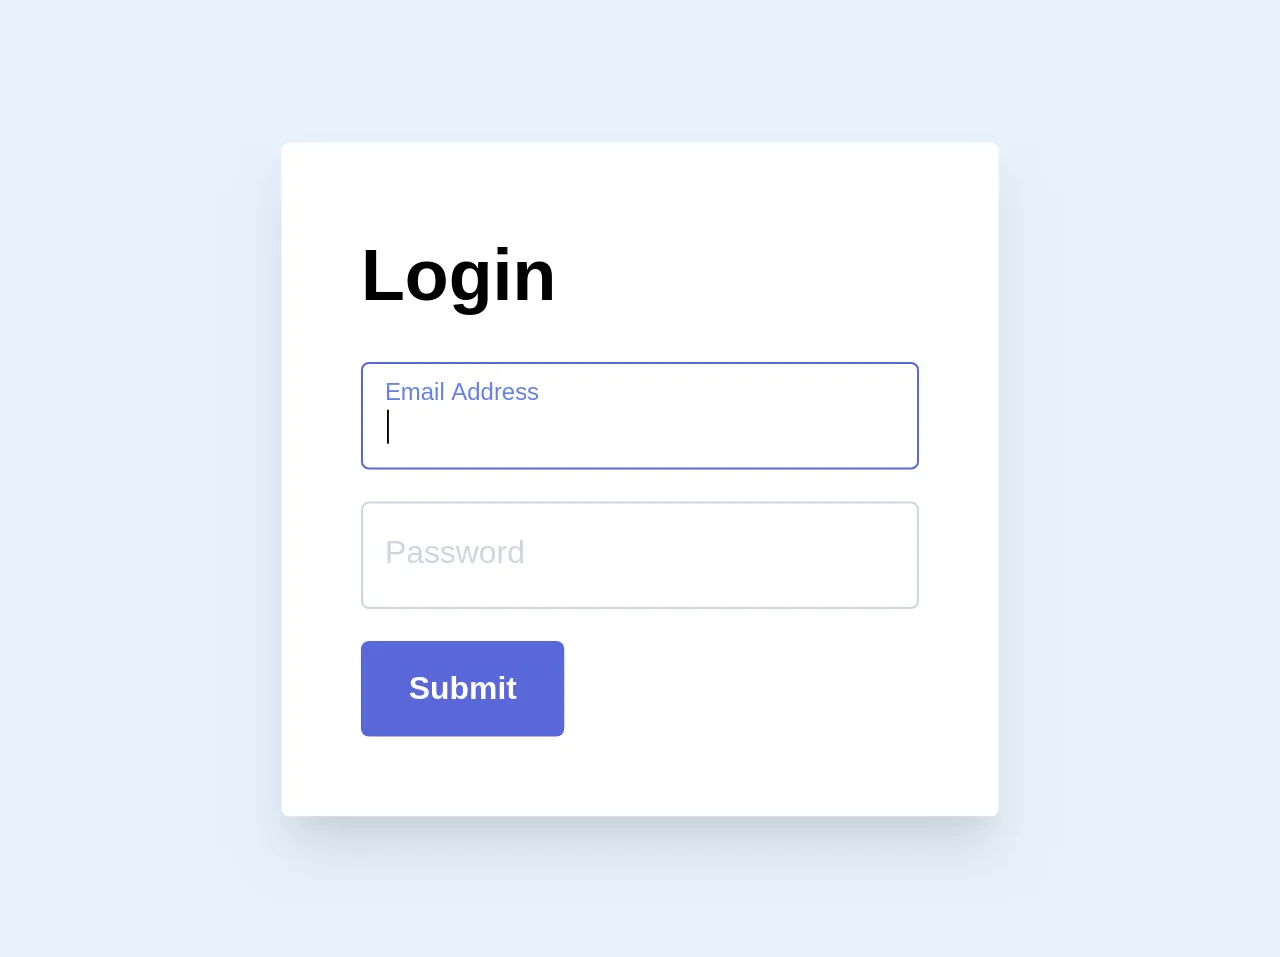 Cool Text Inputs and Login